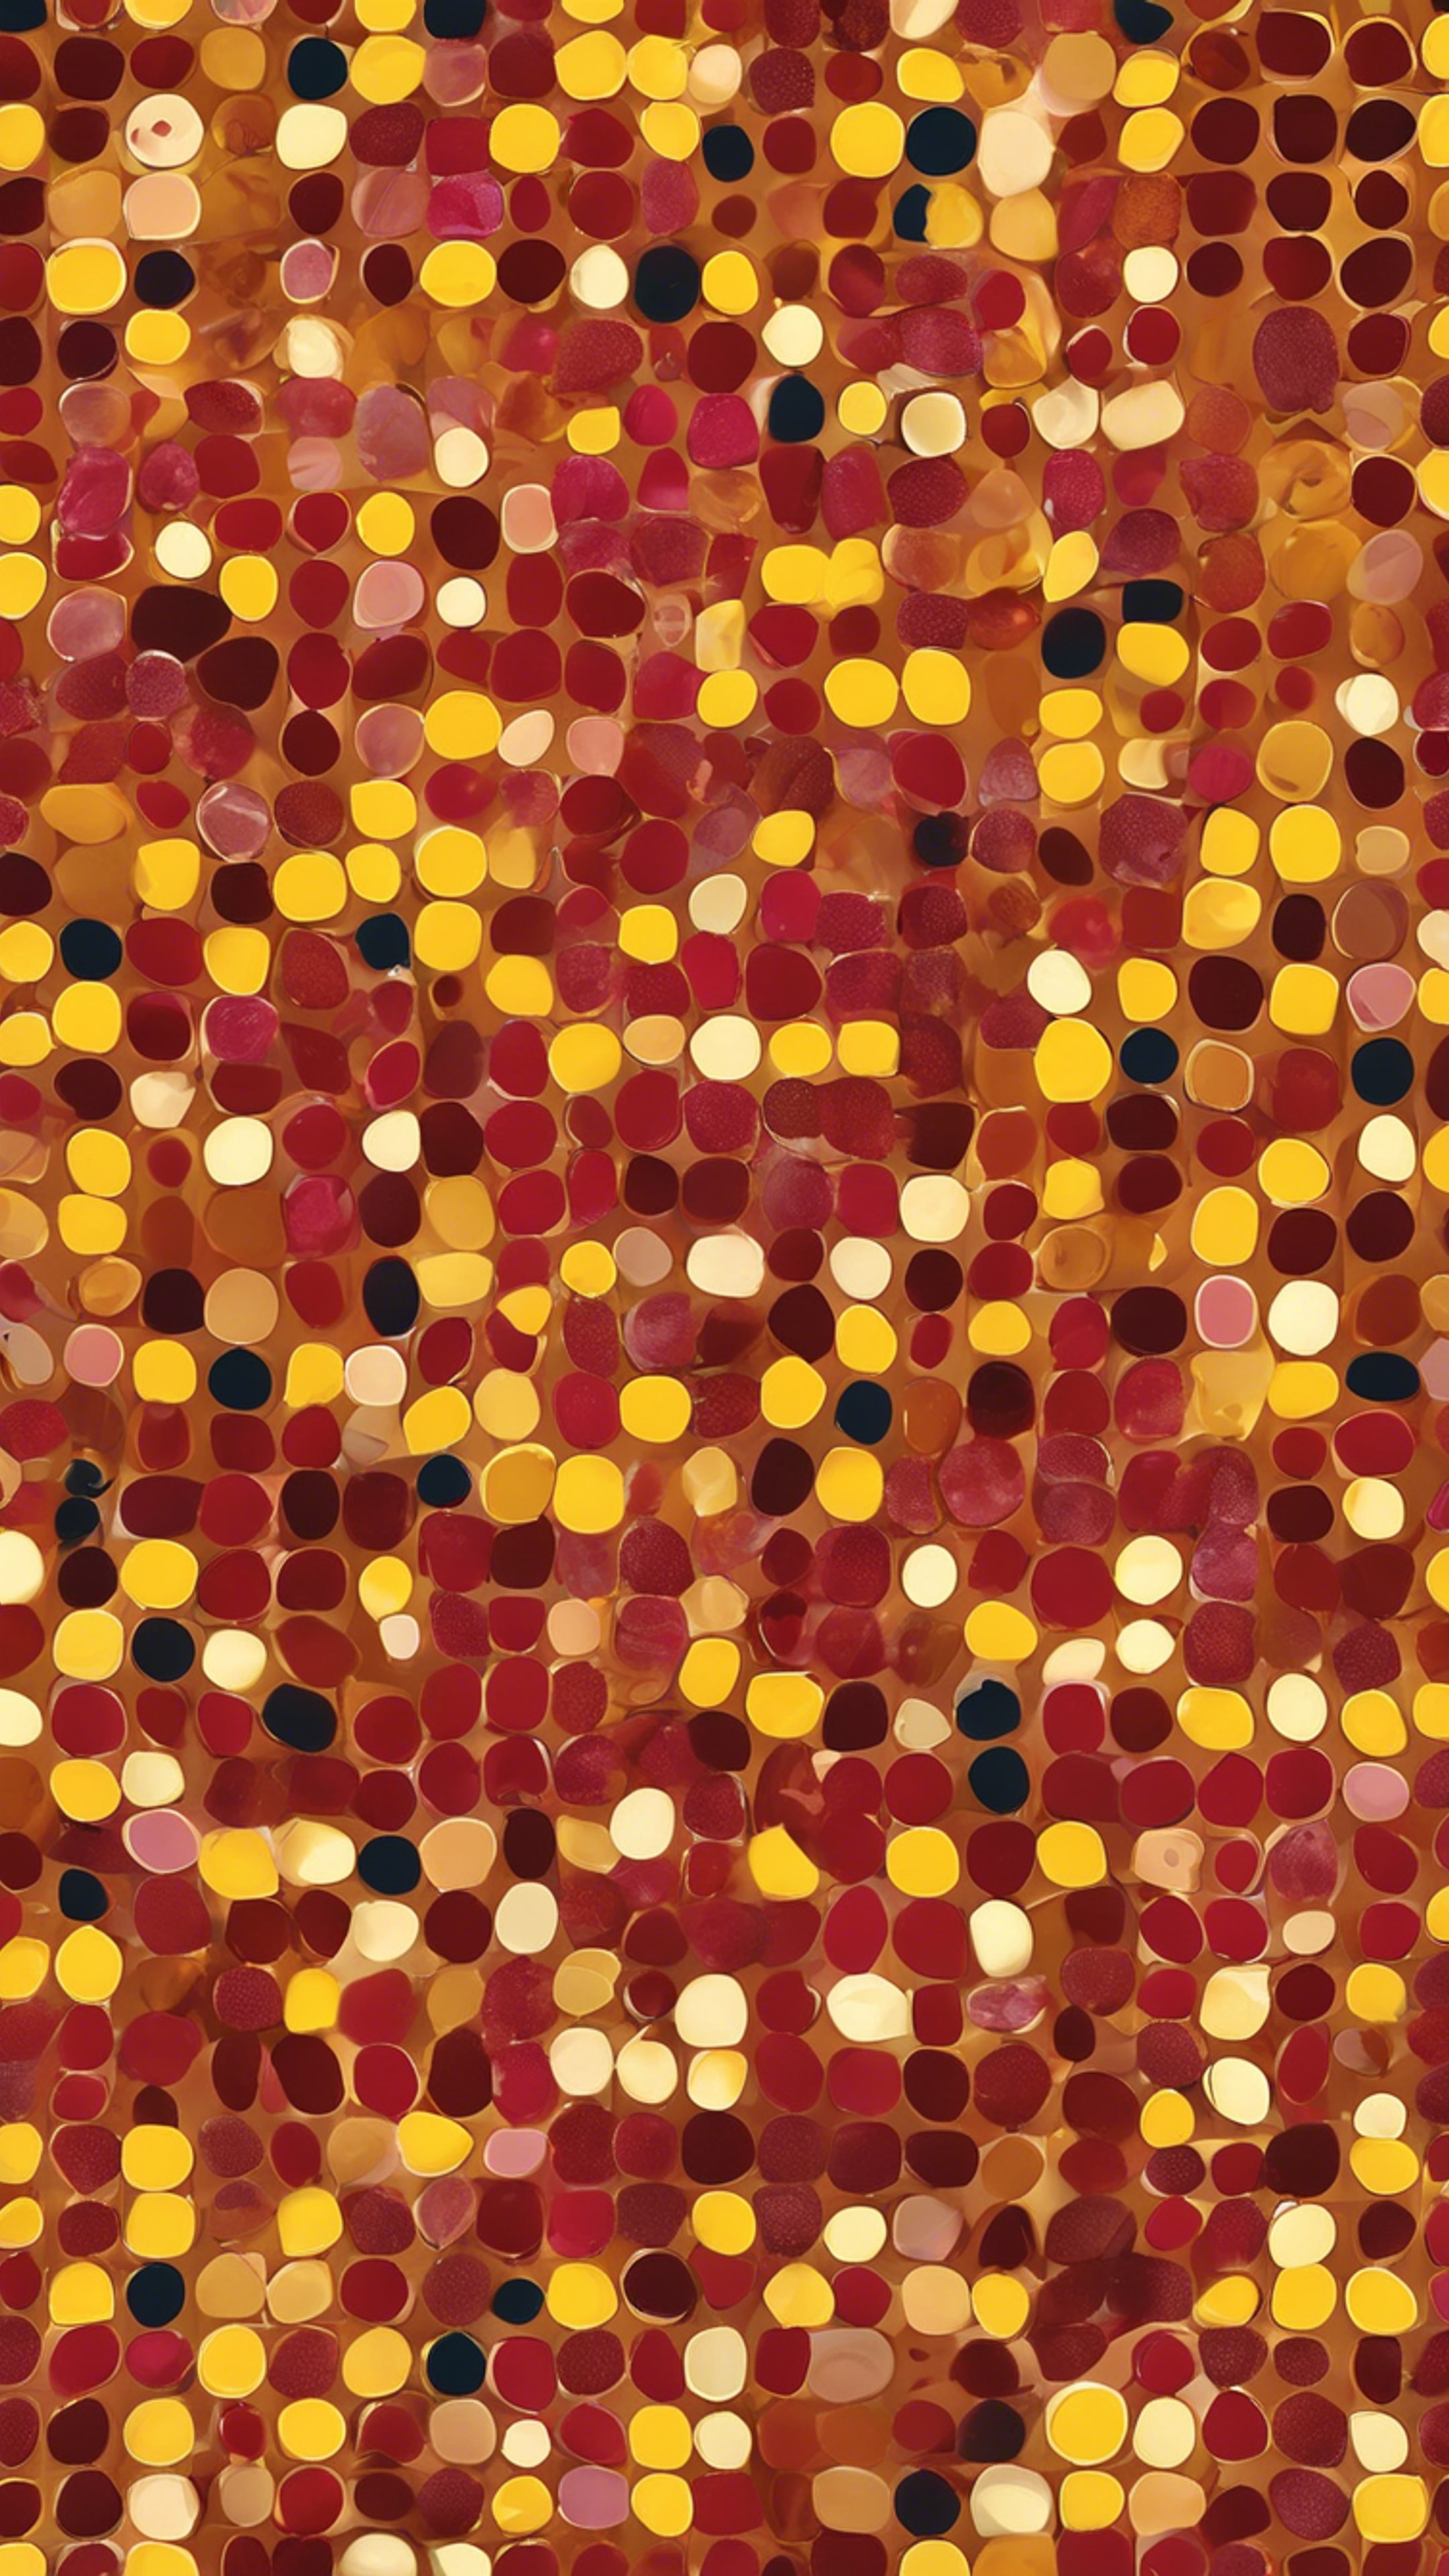 Vibrant pattern of polka dots, a mix of ruby red ones and mustard yellow ones. Wallpaper[8e468345fc0d4ef4ba5a]